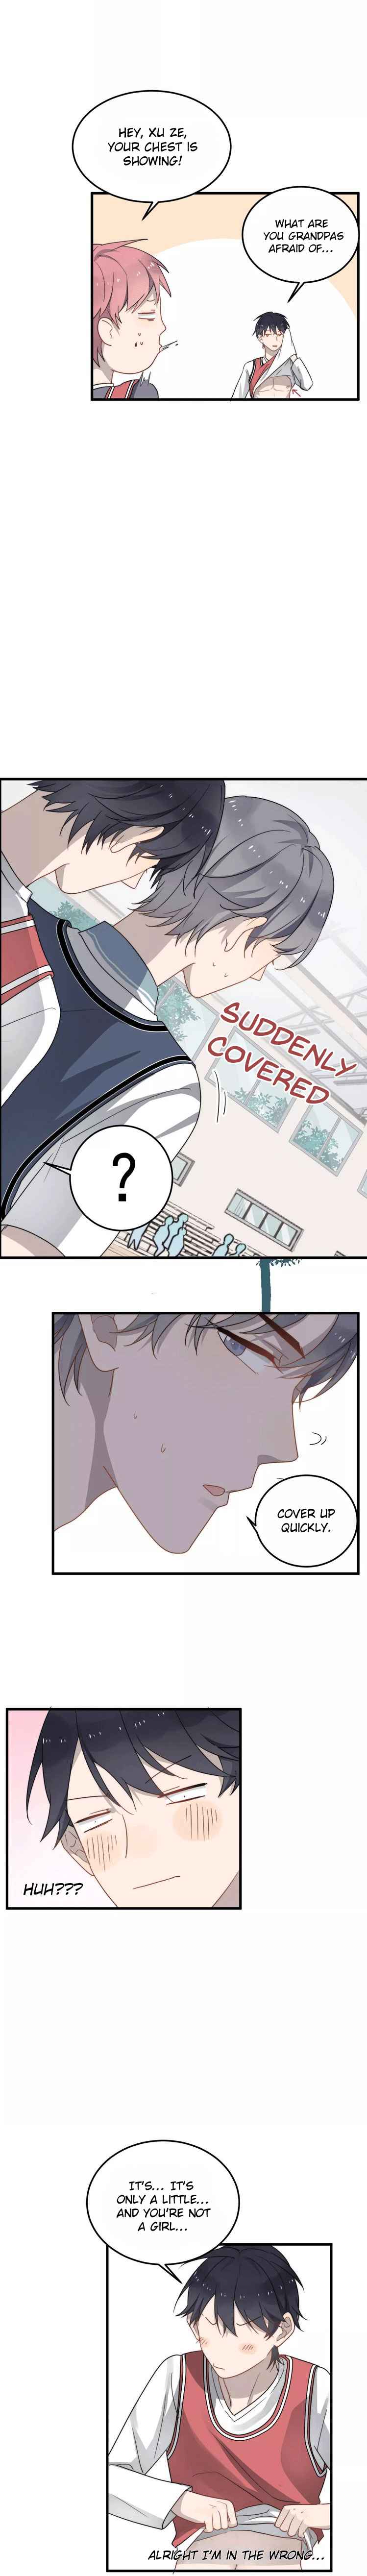 Too Close Ch. 9 He's A Member of the Student Council